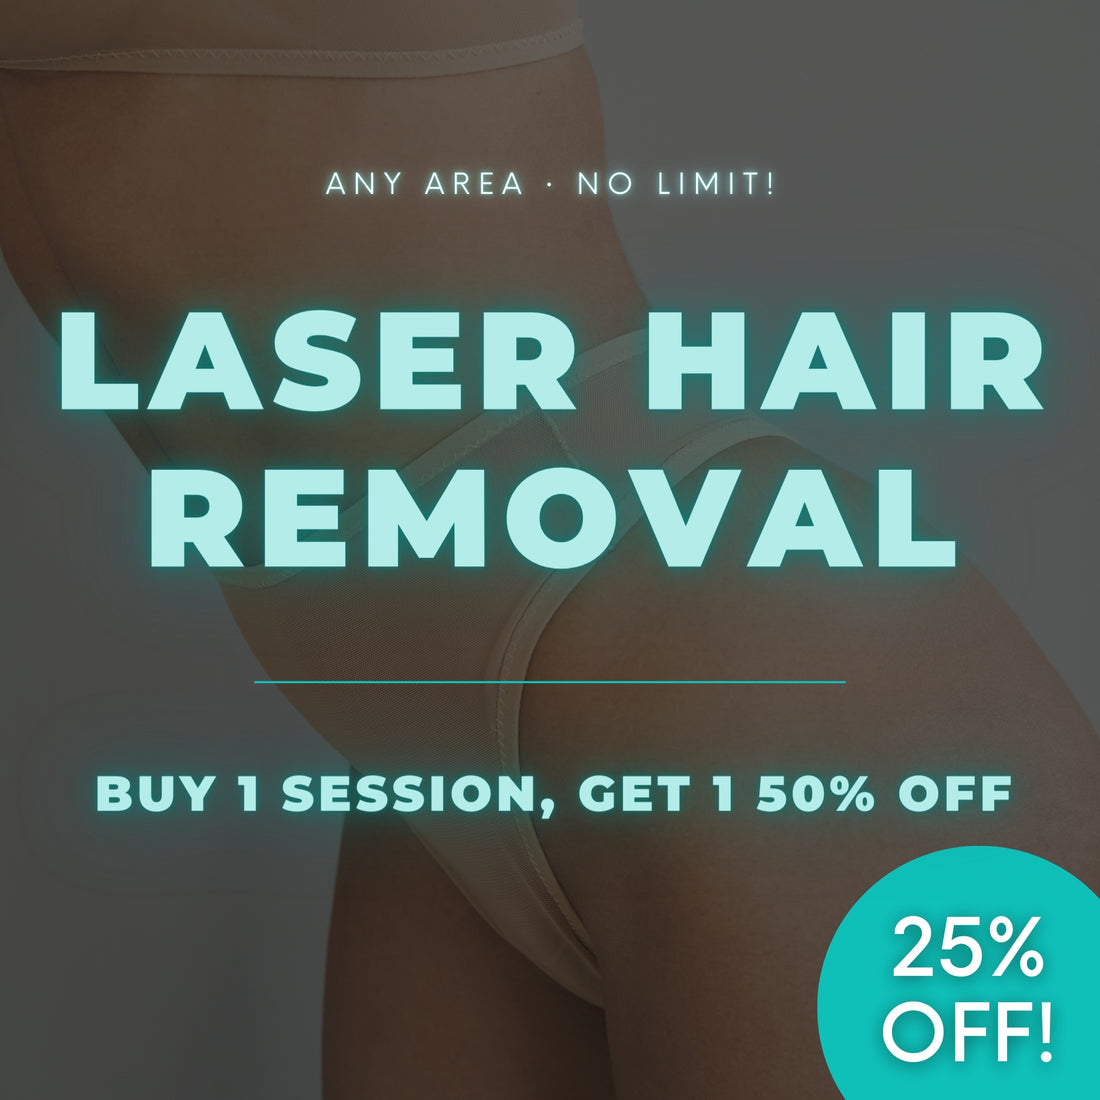 Laser Hair Removal | Buy 1 Session, Get 1 50% OFF